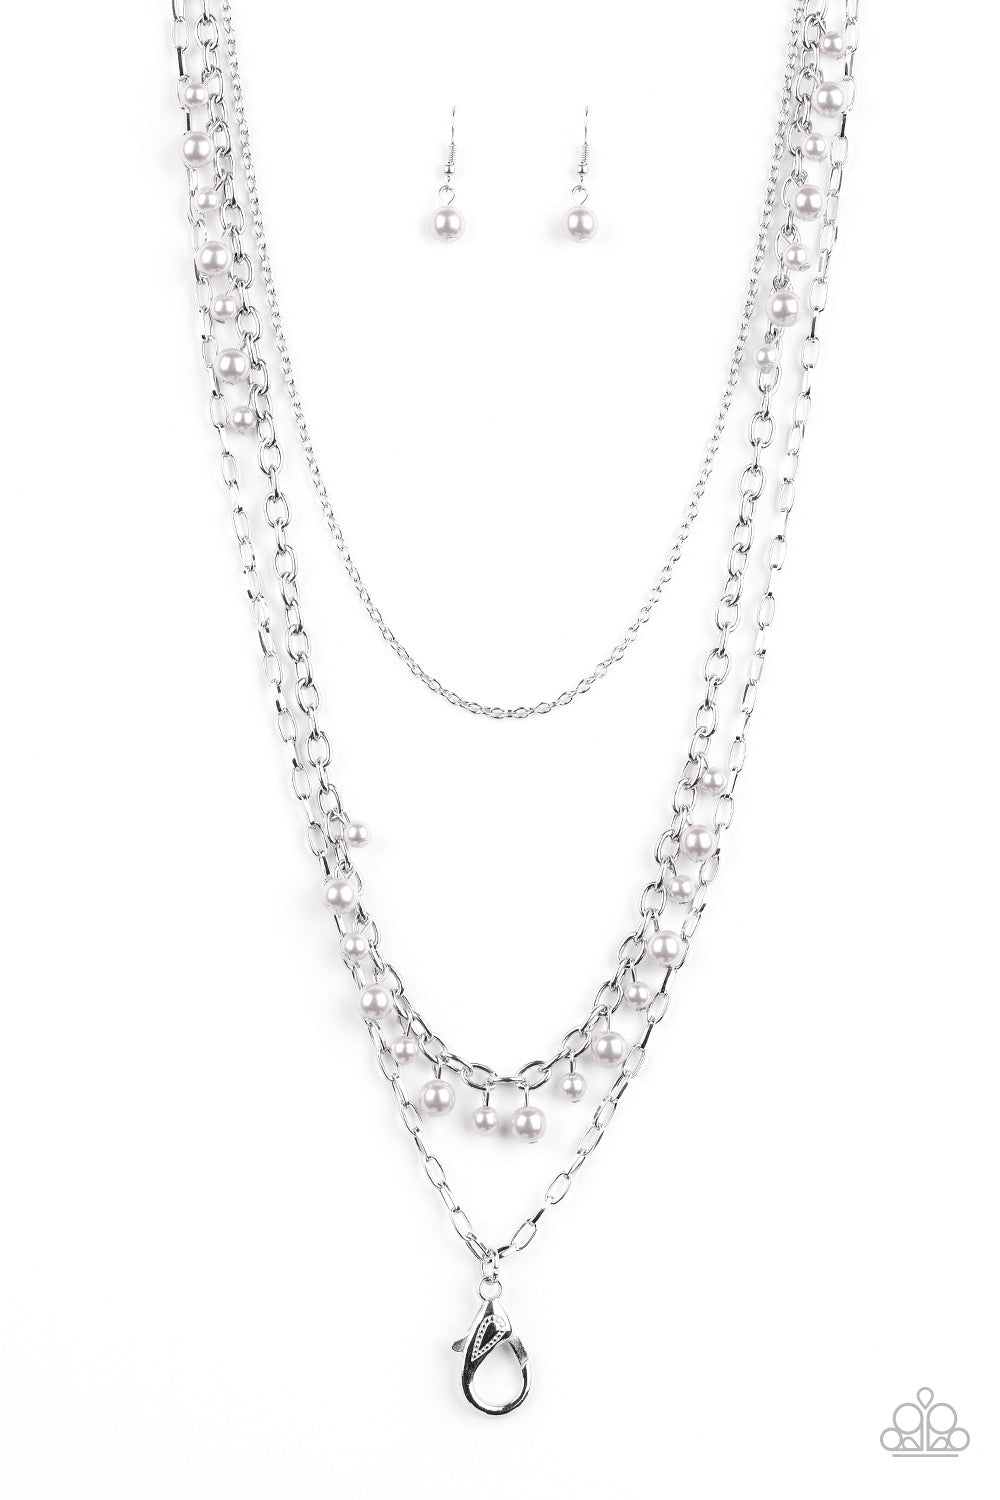 PEARL PAGEANT - SILVER LANYARD NECKLACE